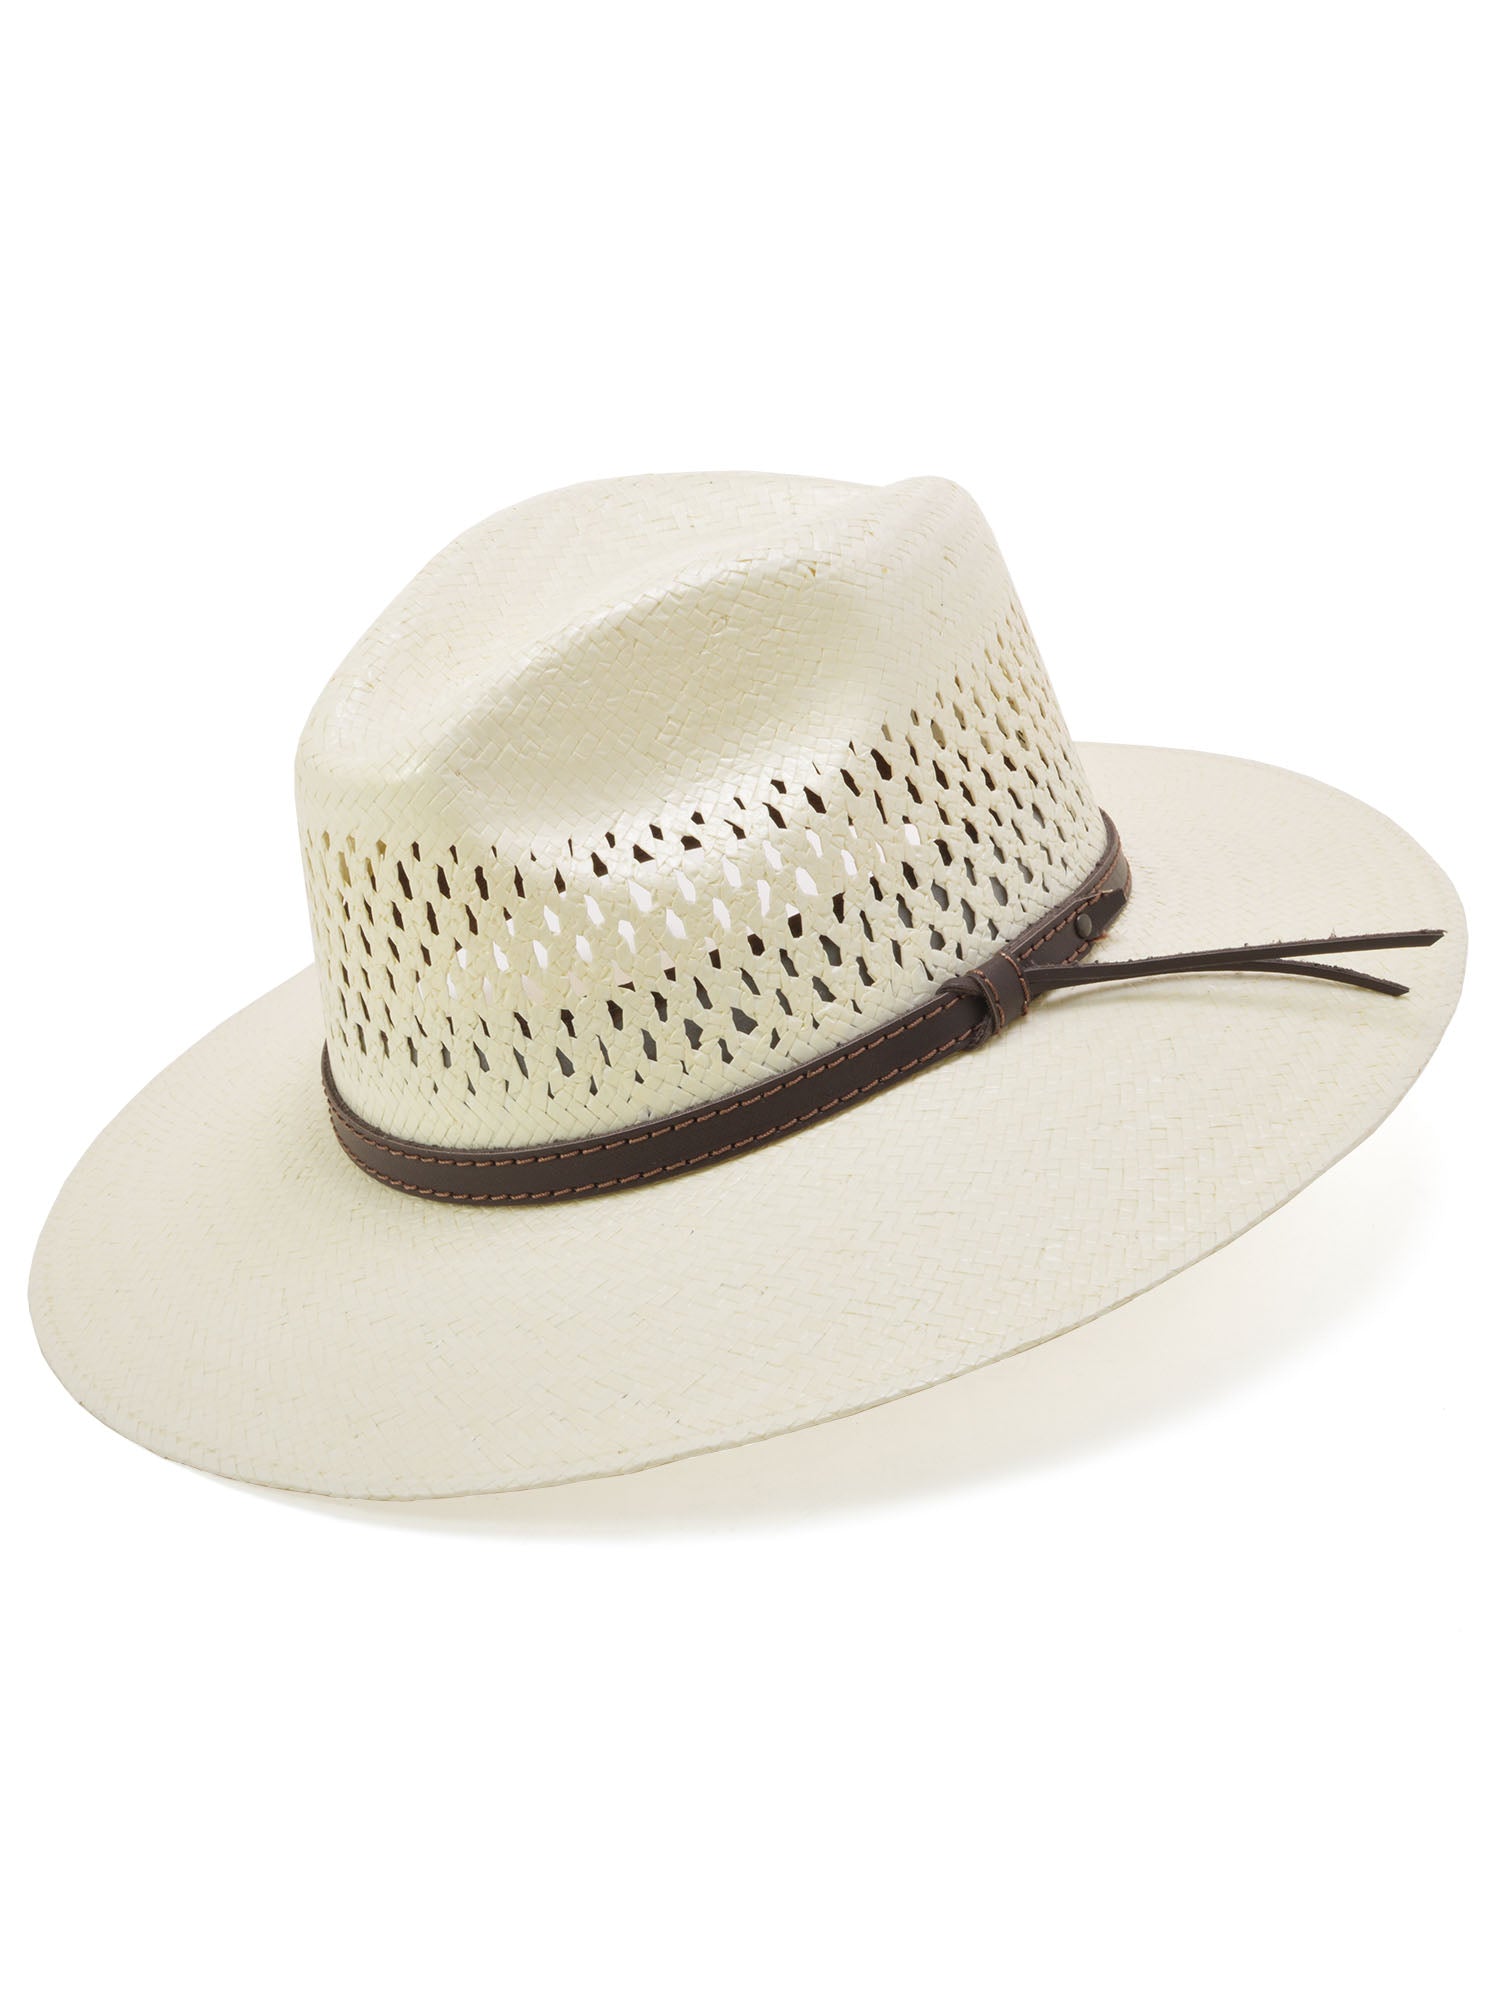 Stetson Digger Vented Shantung Straw Hat